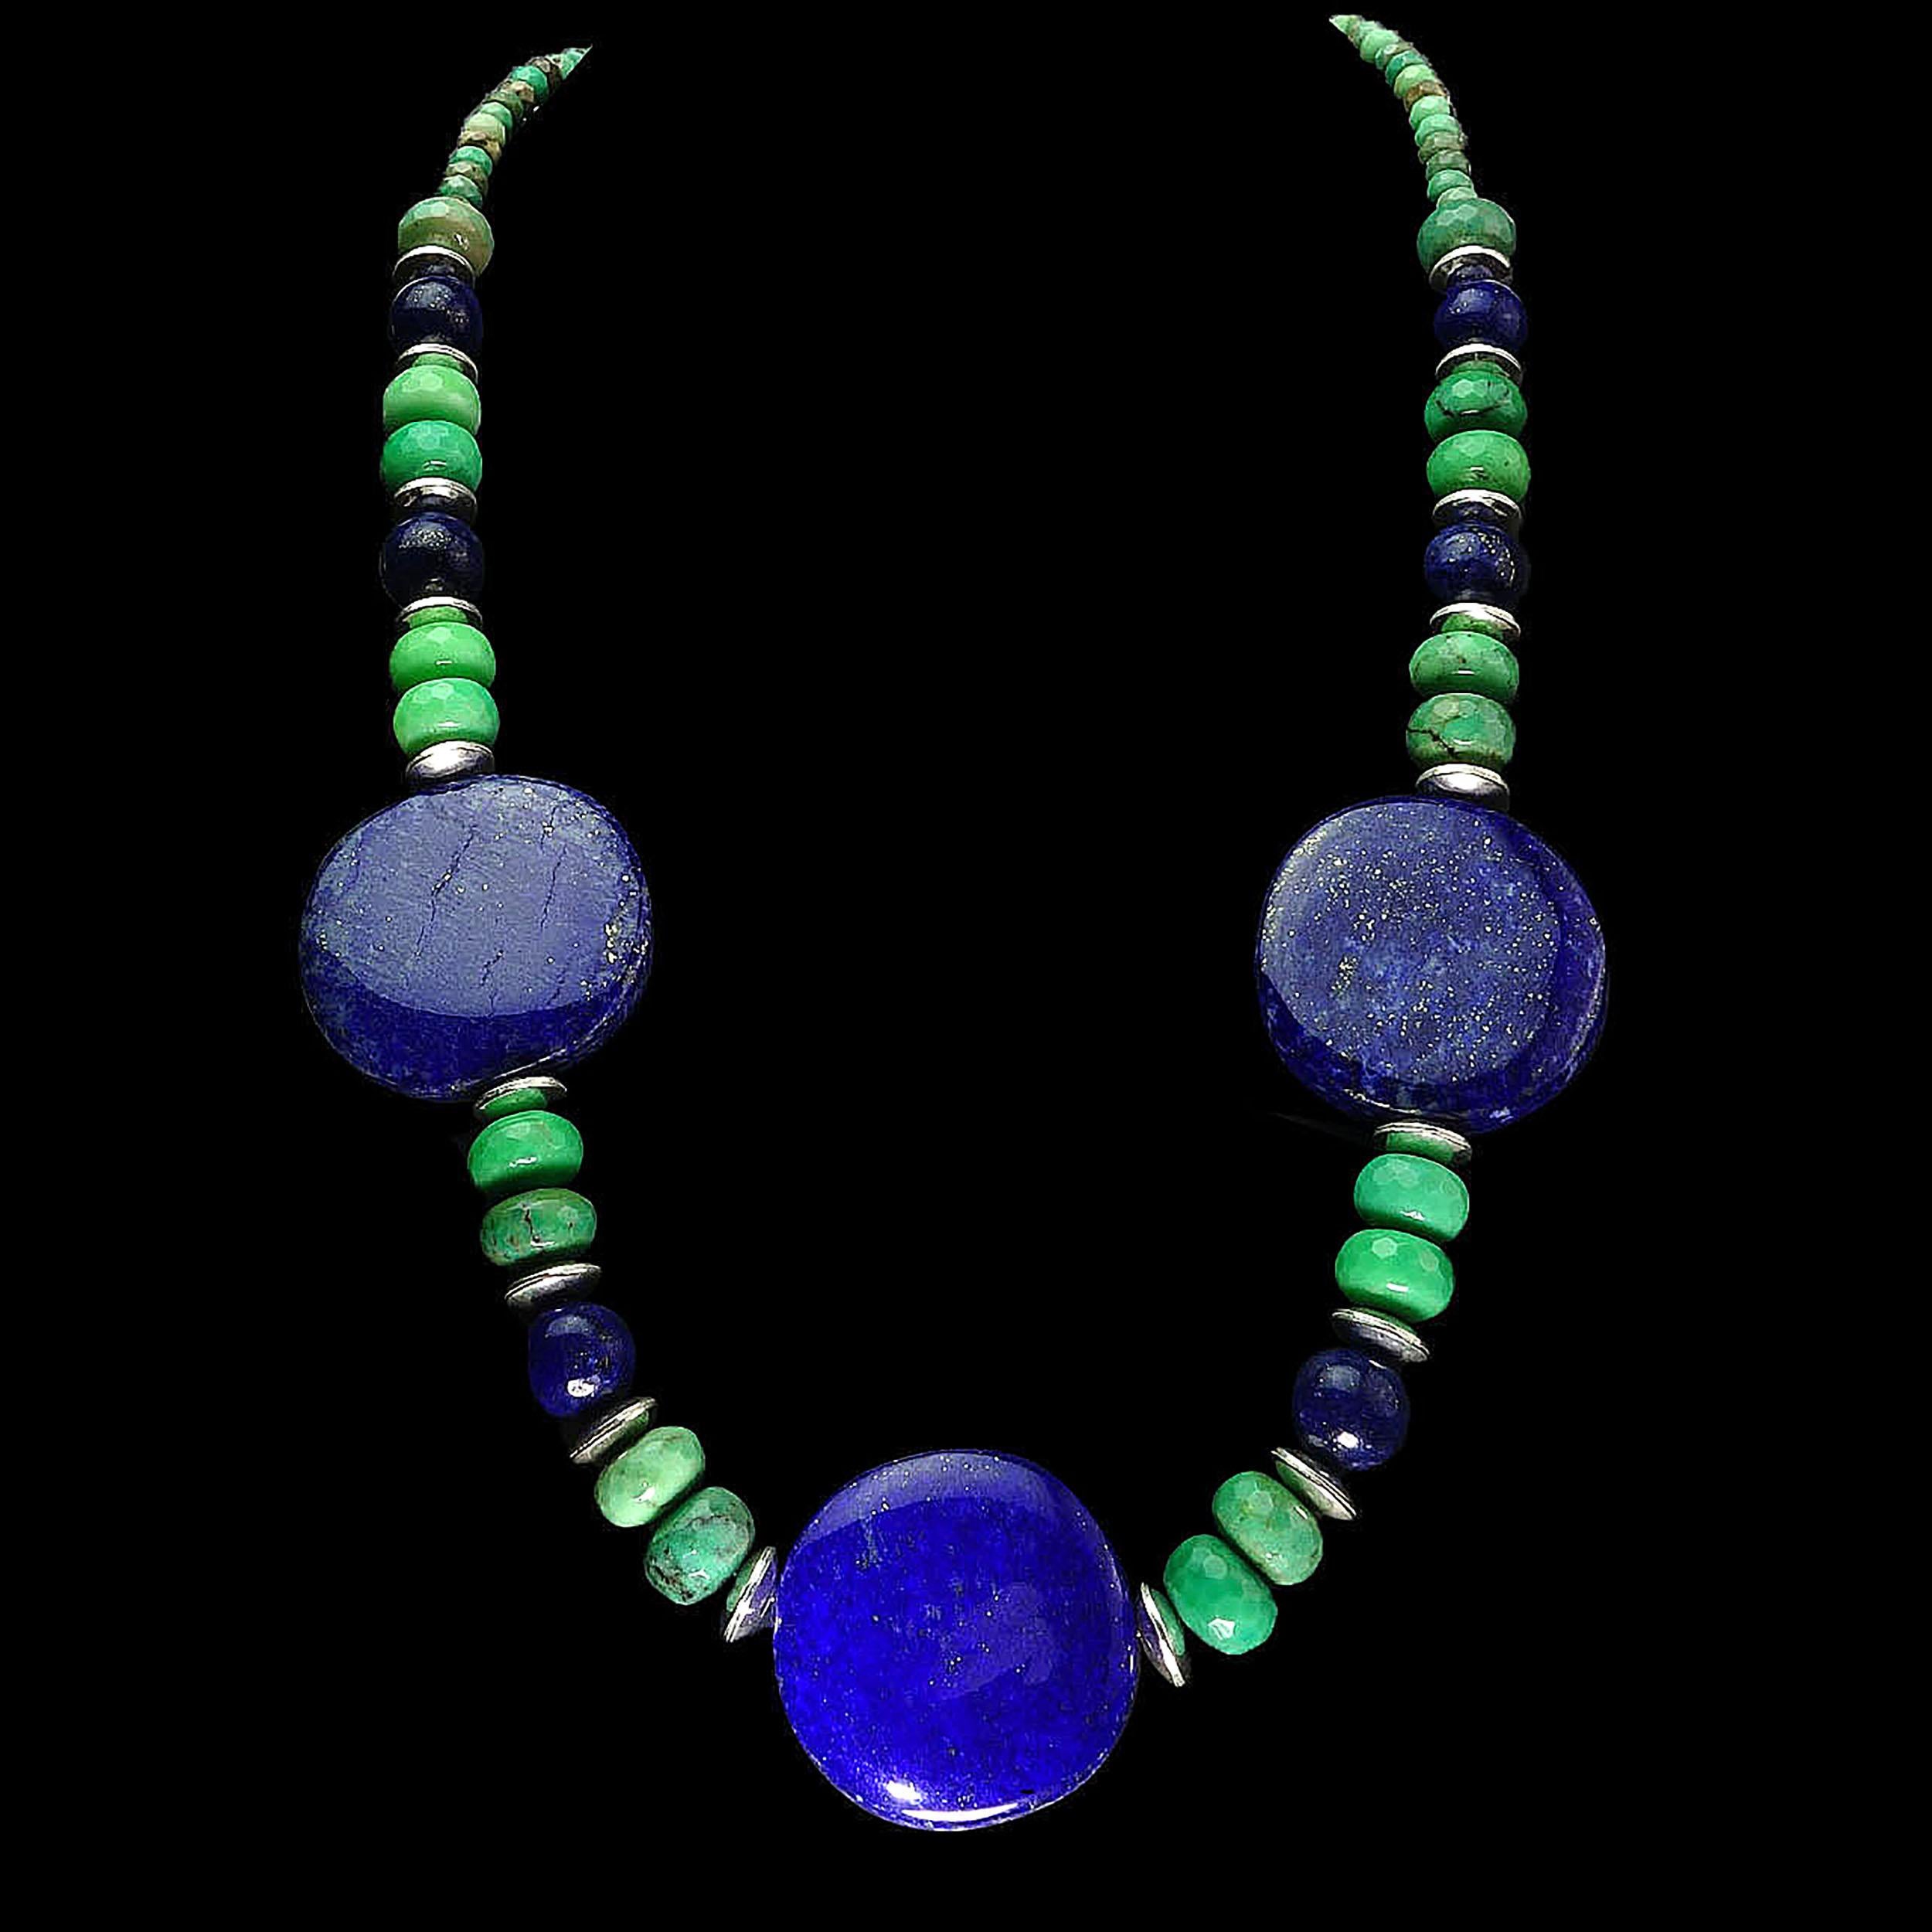 Artisan AJD Statement Necklace in Lapis Lazuli, Chrysoprase, and Silver